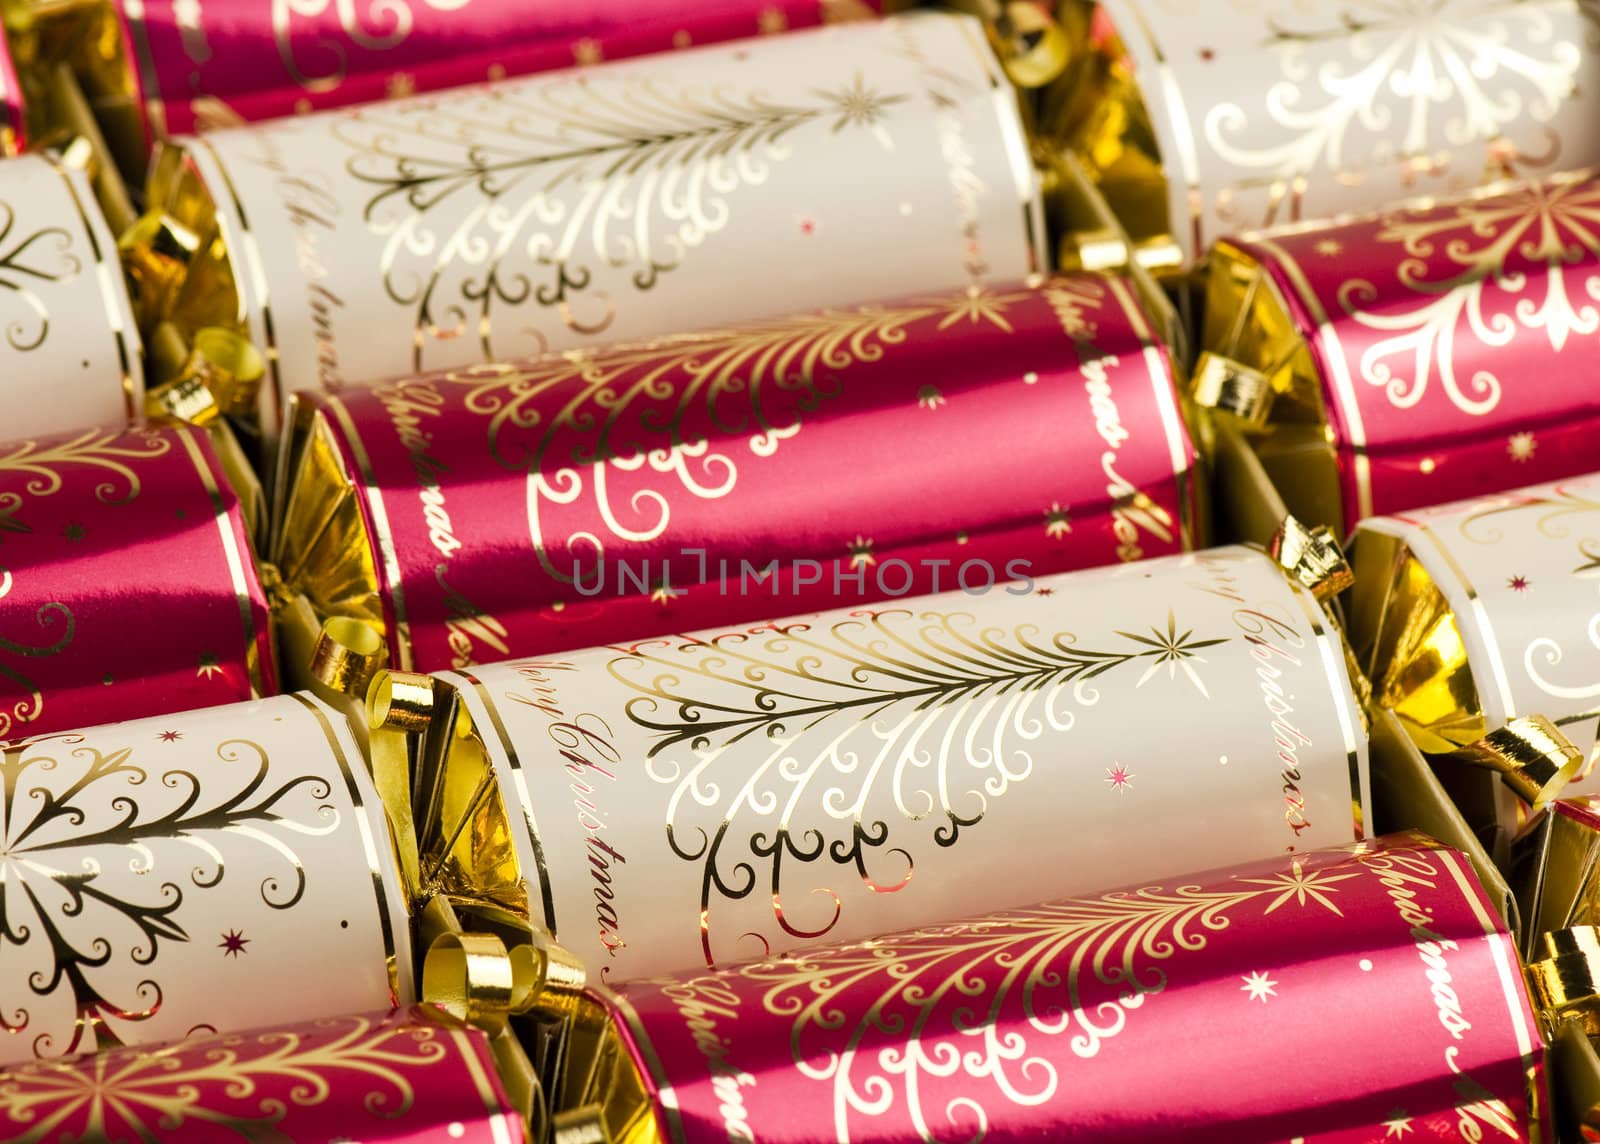 Golden and red Christmas crackers